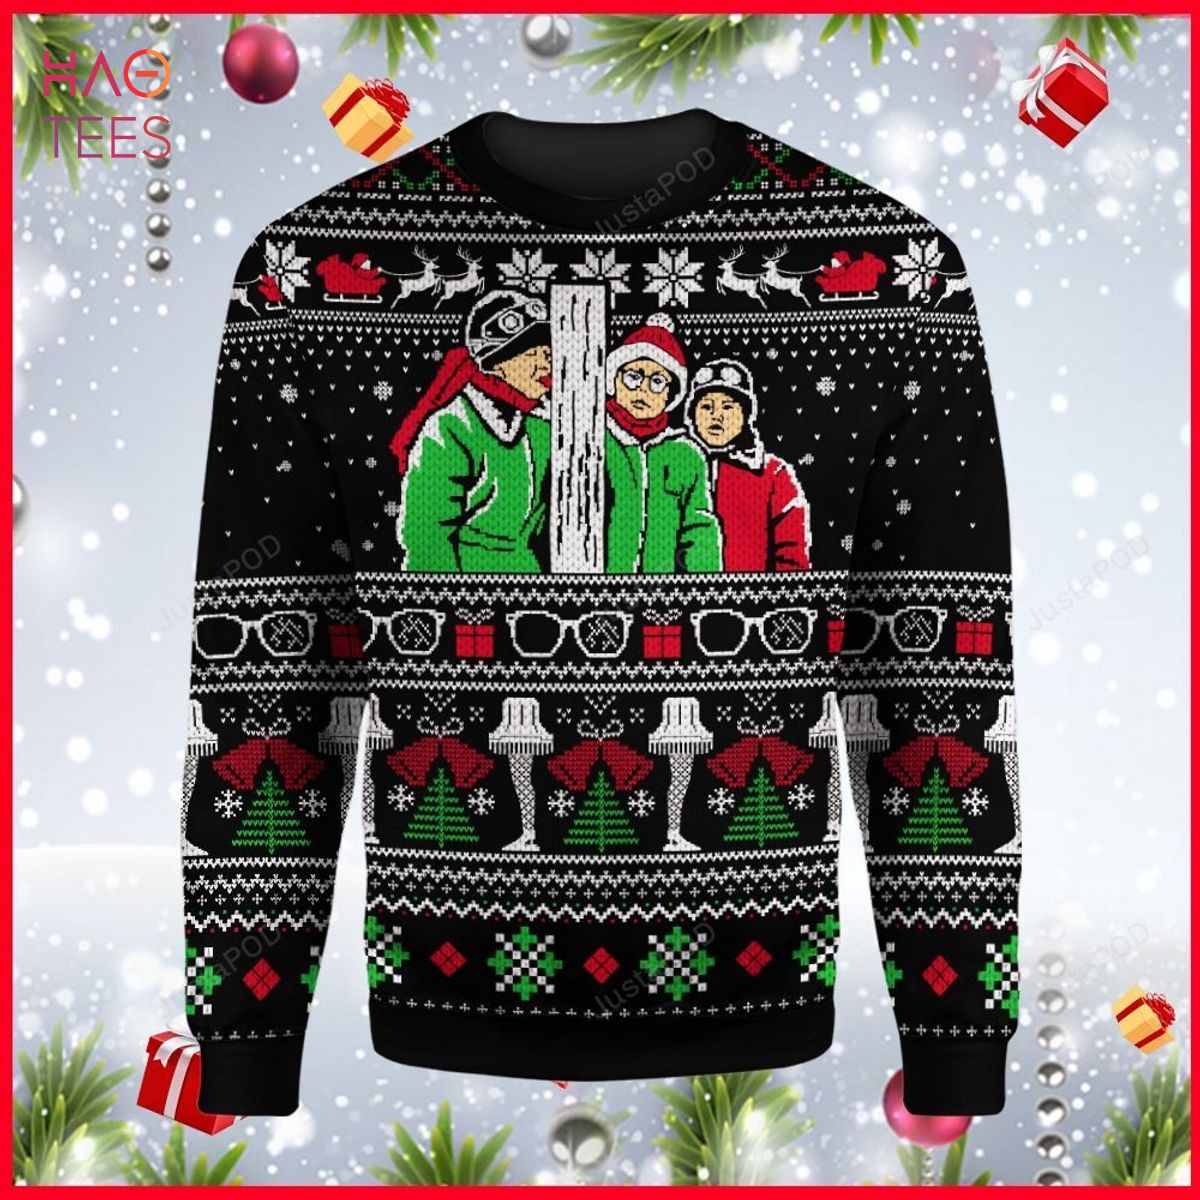 BEST A Christmas Story Ugly Christmas Sweater Ugly Sweater Christmas Sweaters